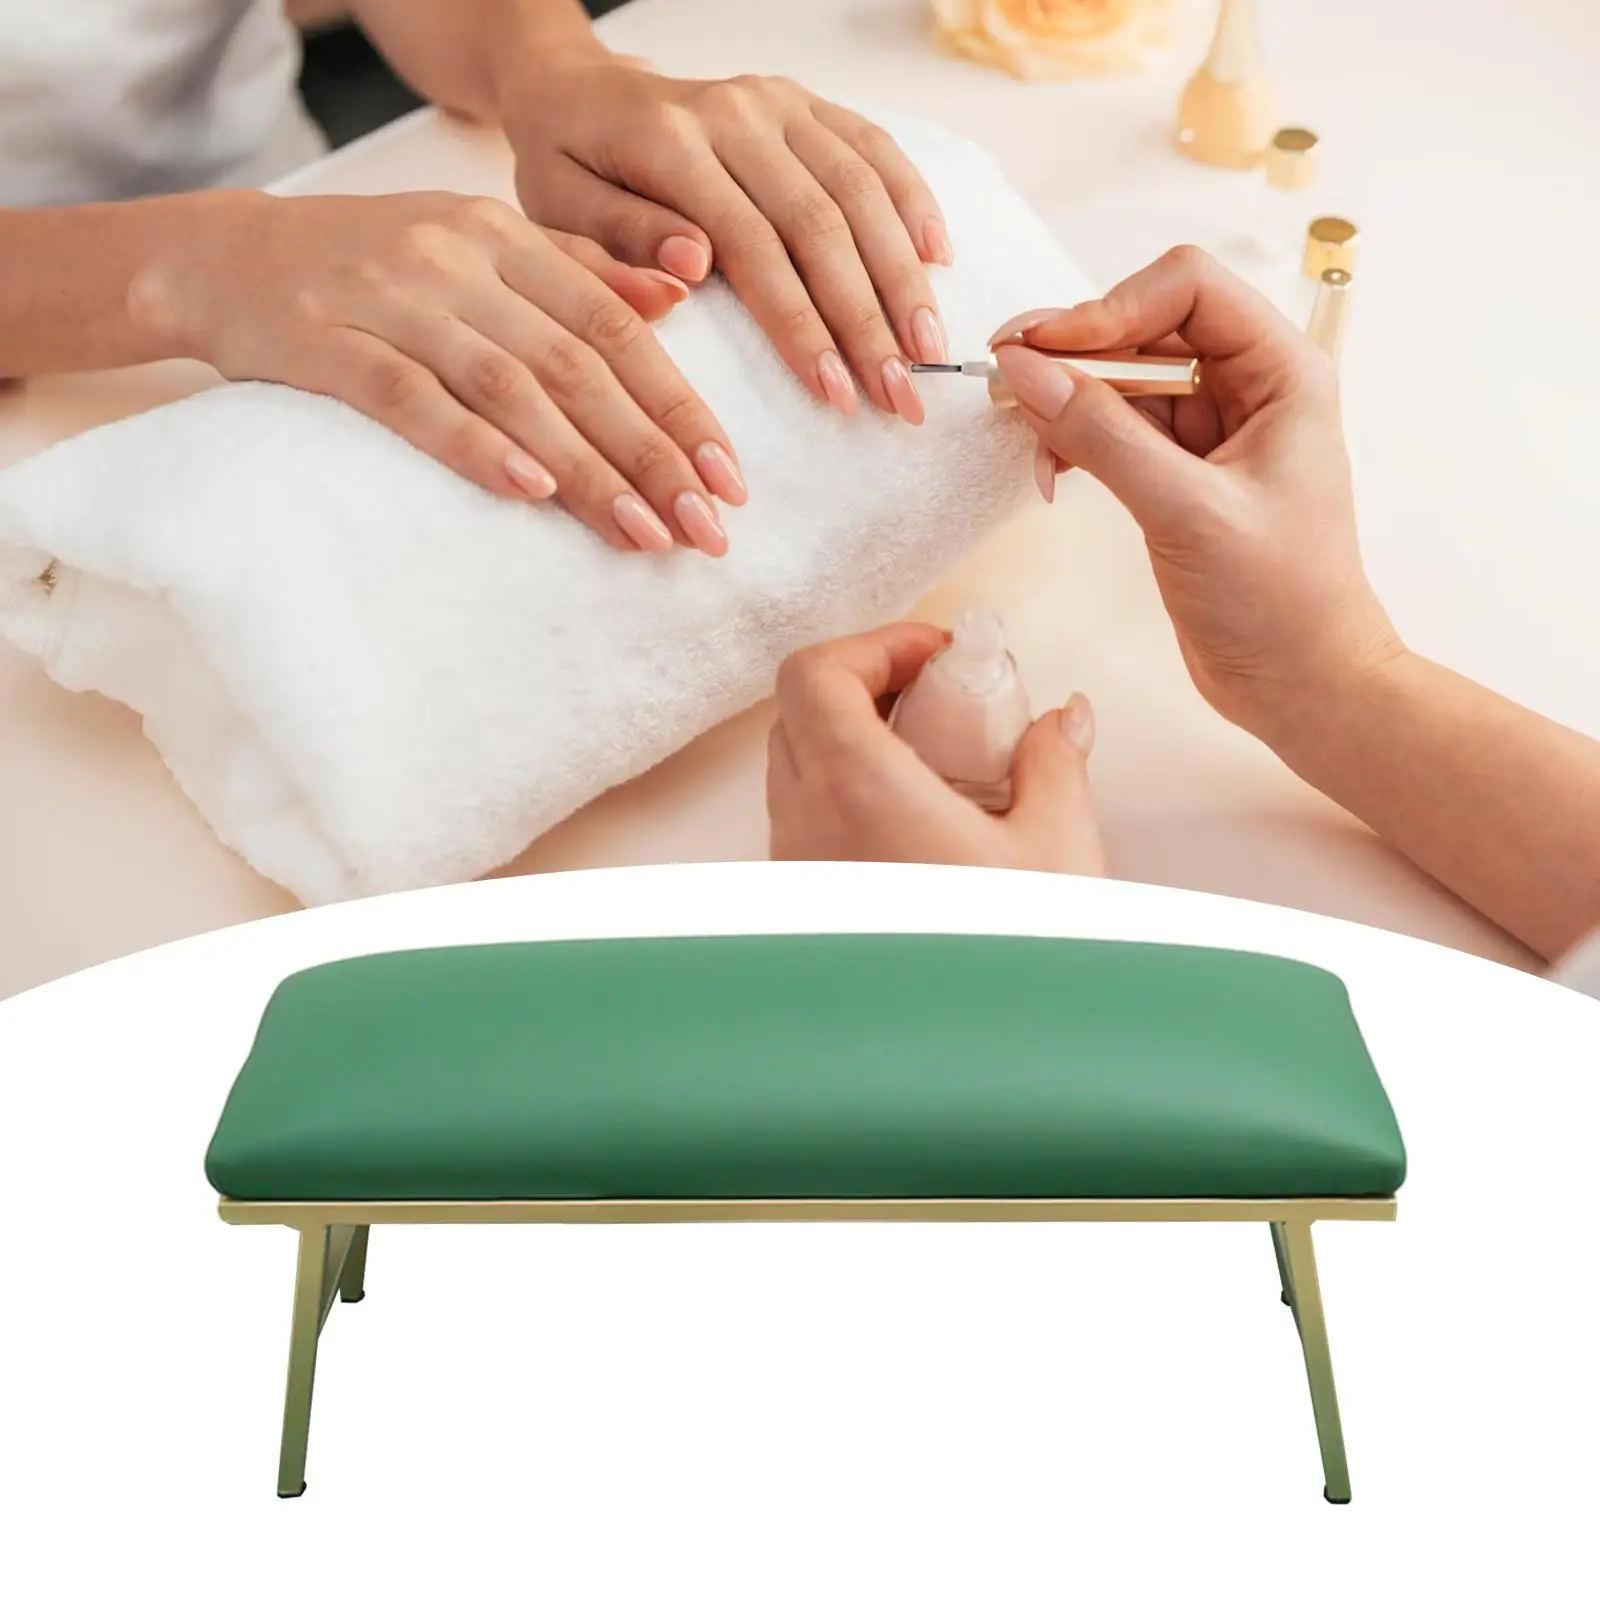 Nail Arm Rest Mat Comfortable Table Premium Manicure Hand Pillow Manicure Tool Accessory Hand Nail Art Nail Technician Use